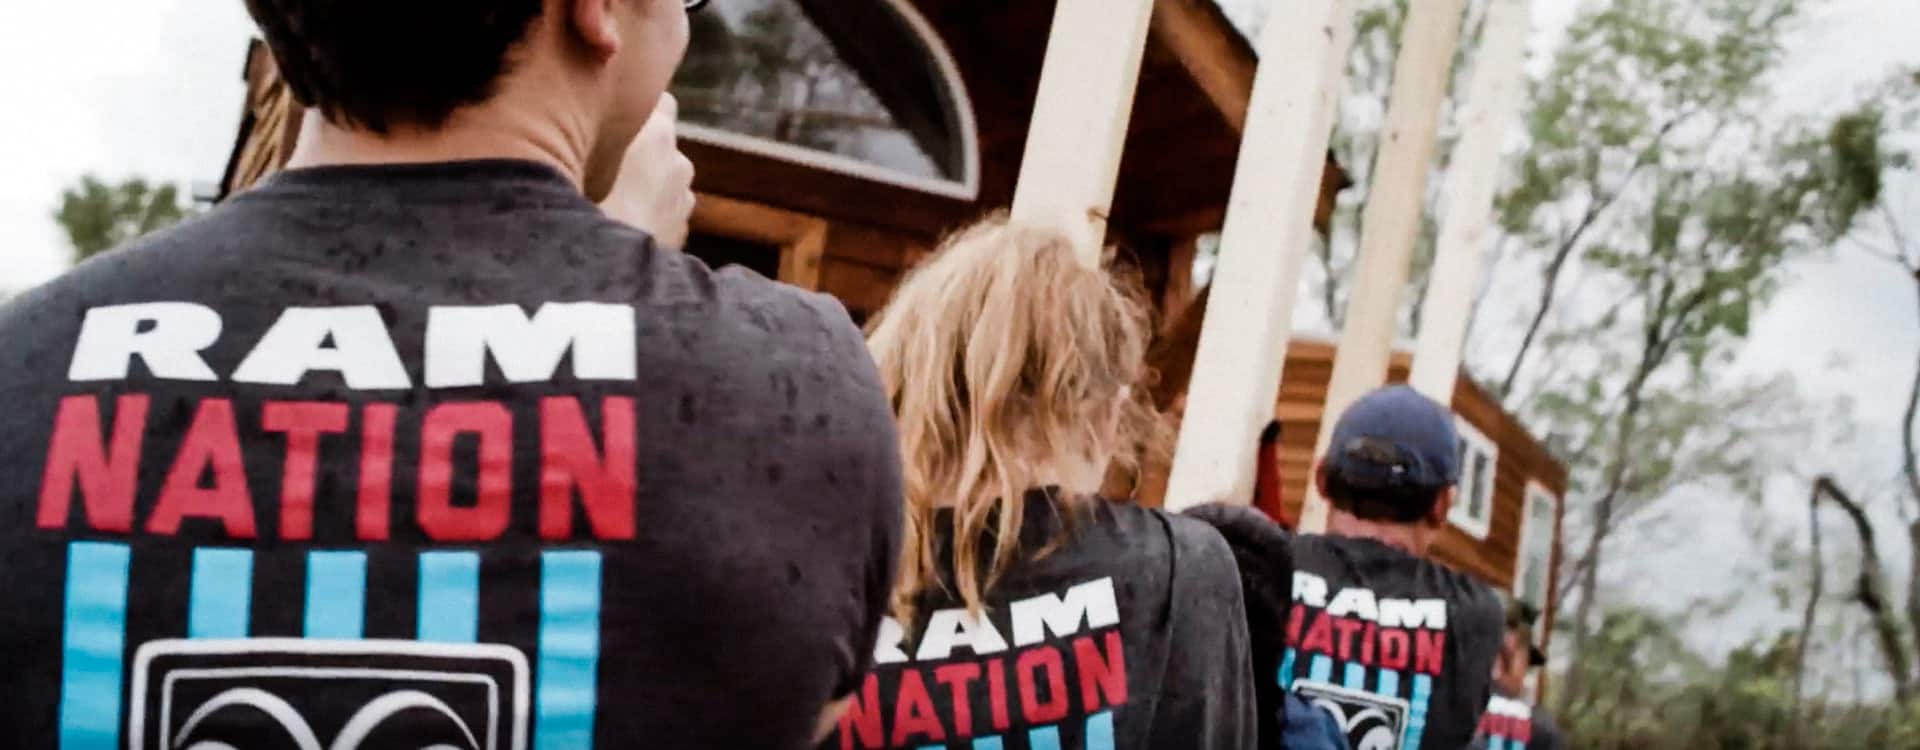 A group of volunteers wearing Ram Nation t-shirts, carrying lumber toward a home.